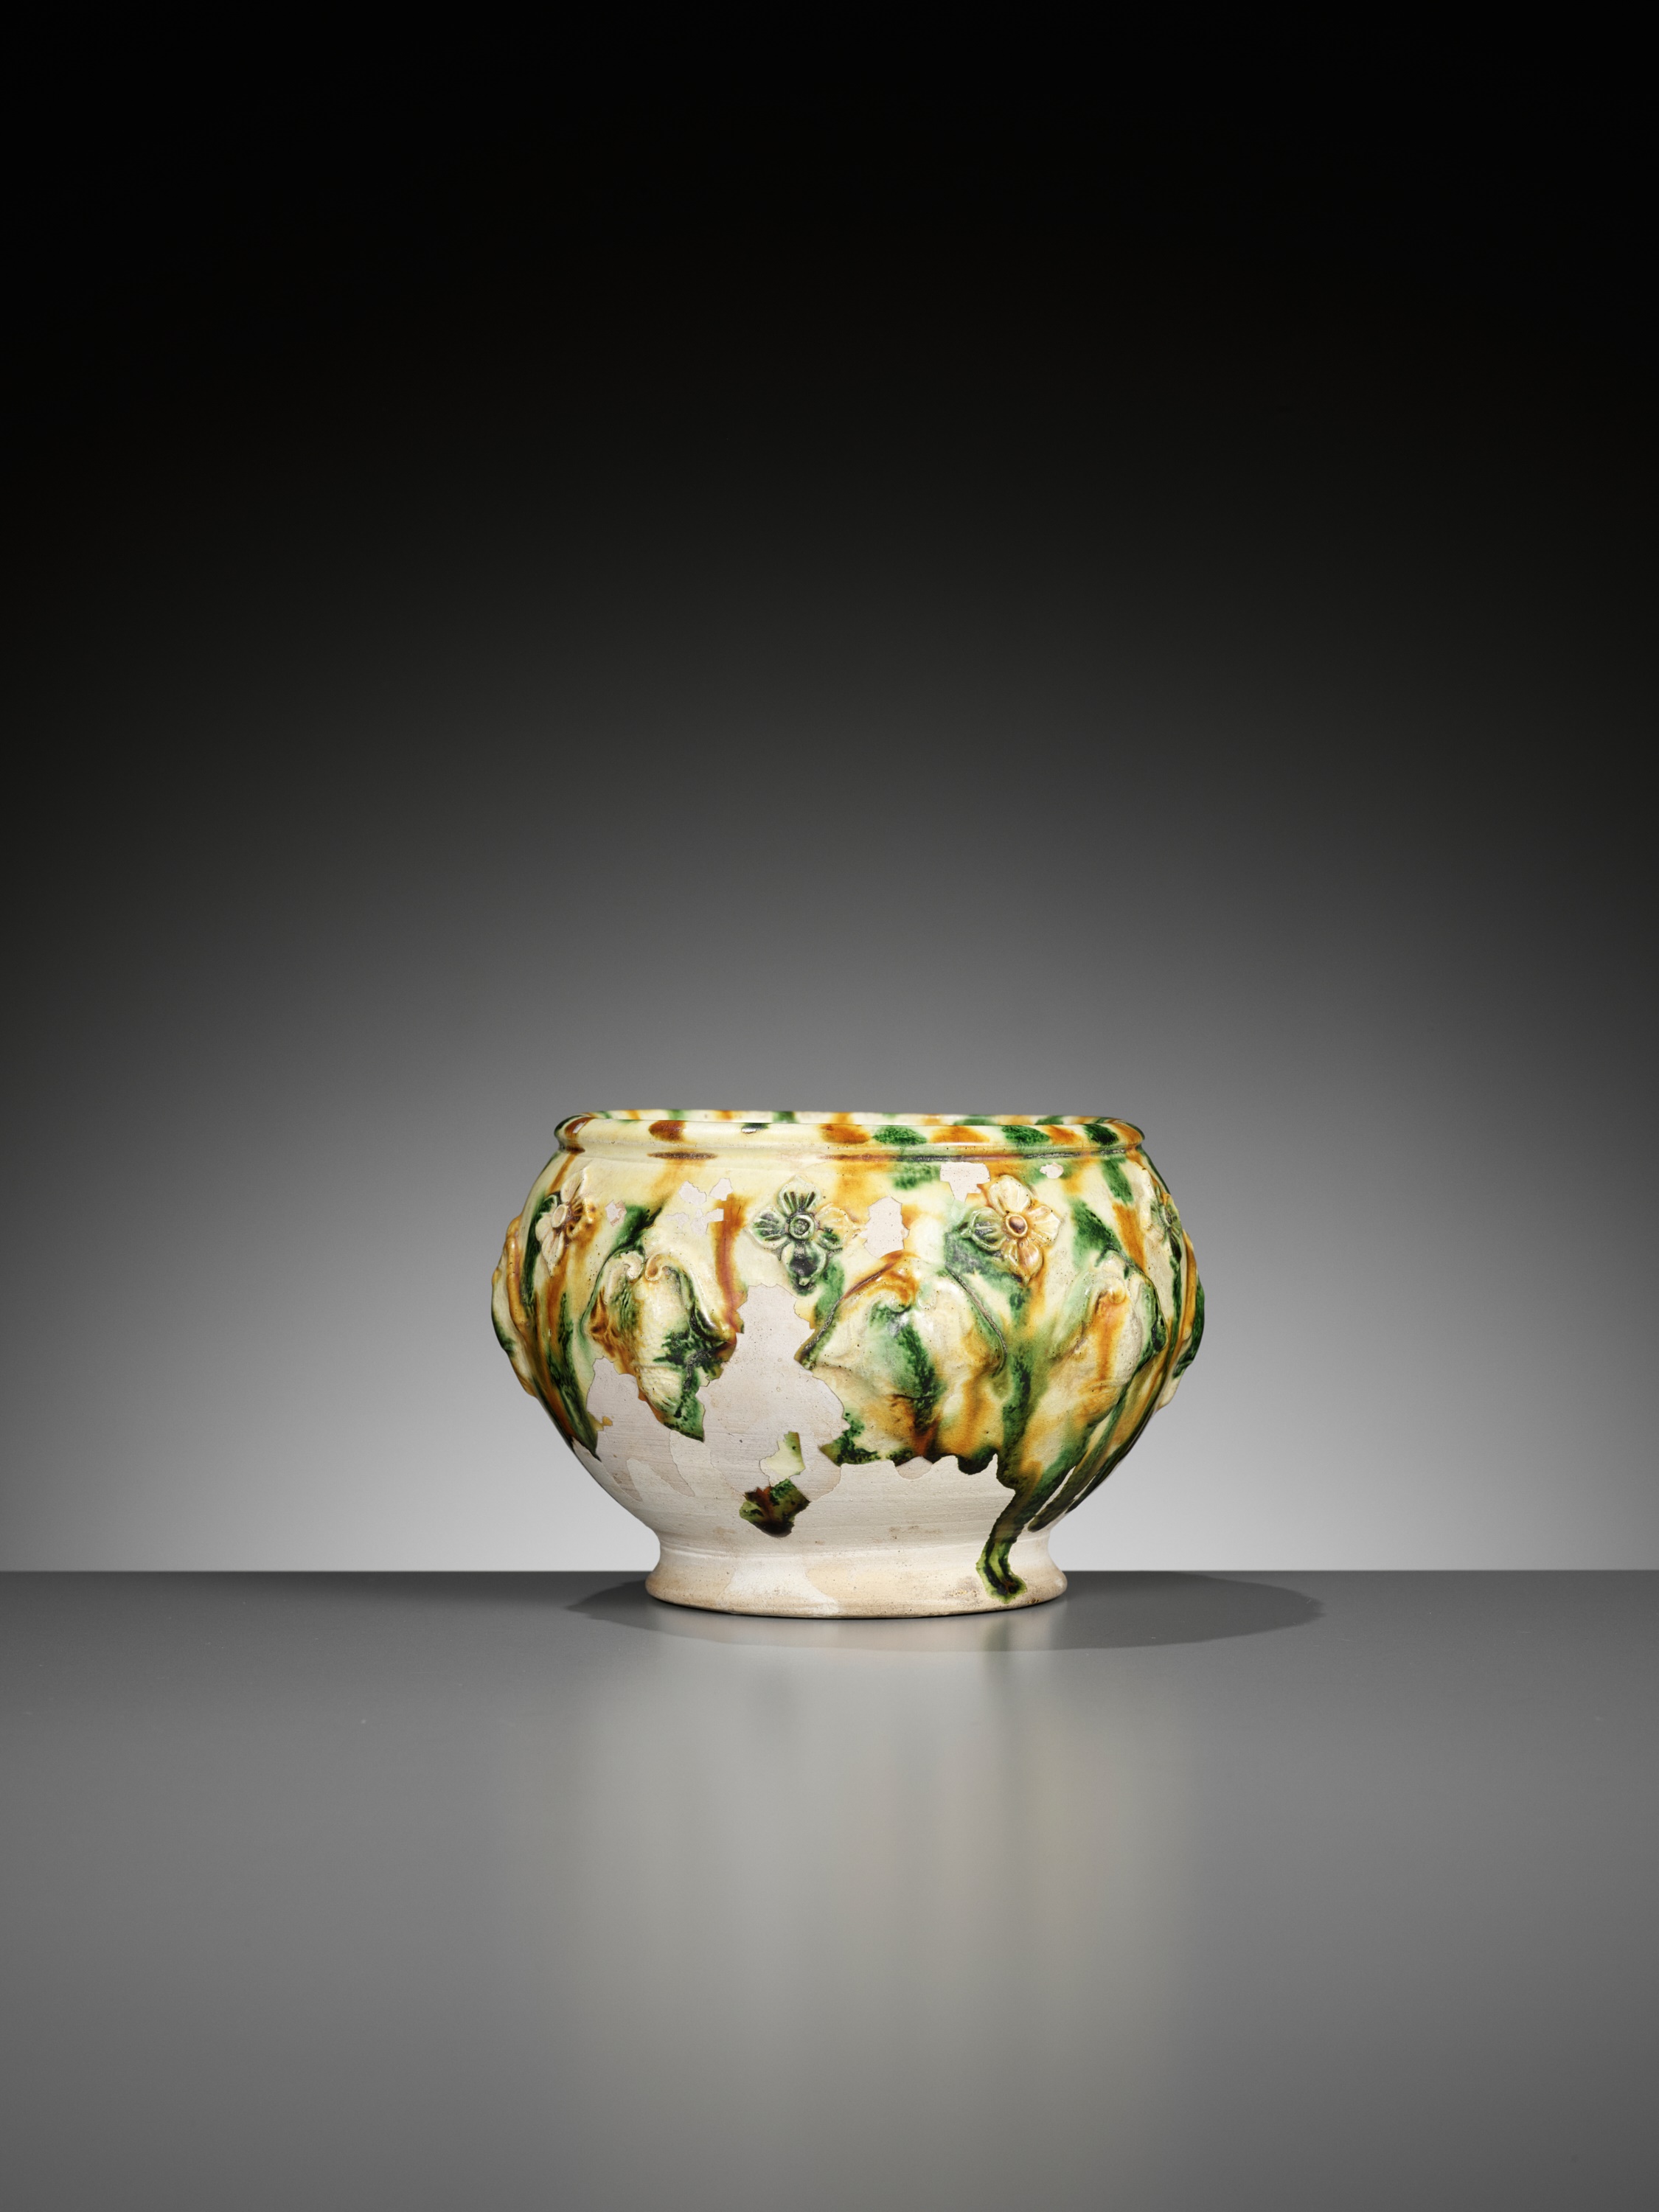 A SANCAI-GLAZED APPLIQUE-DECORATED POTTERY JAR, TANG DYNASTY - Image 3 of 12